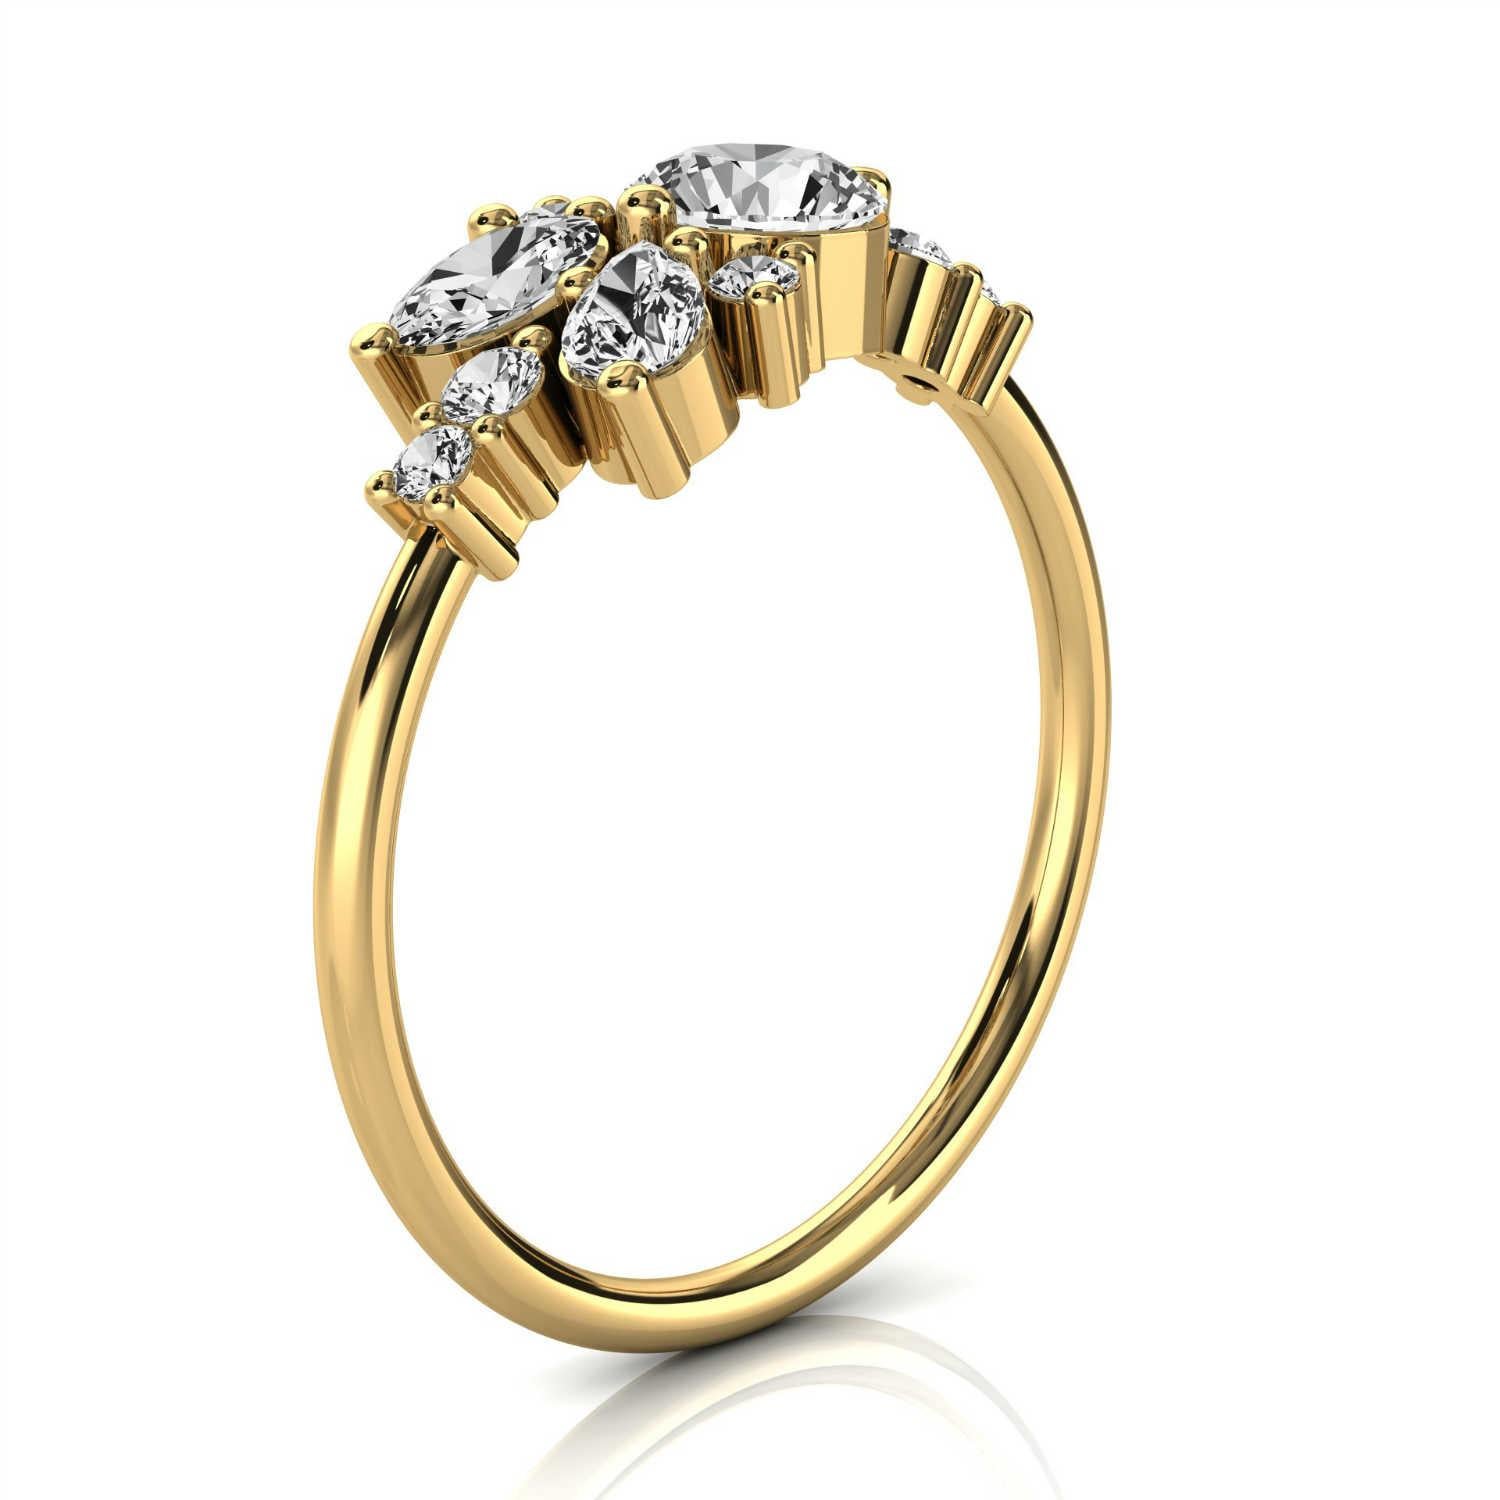 This Delicate ring features nine (9) diamonds scattered on top of a 1.2 mm band. This summer of love of Oval, Pear, and Round shape diamonds creates the ultimate organic ring. It's stackable-Its fun! Experience the difference in person!

Product